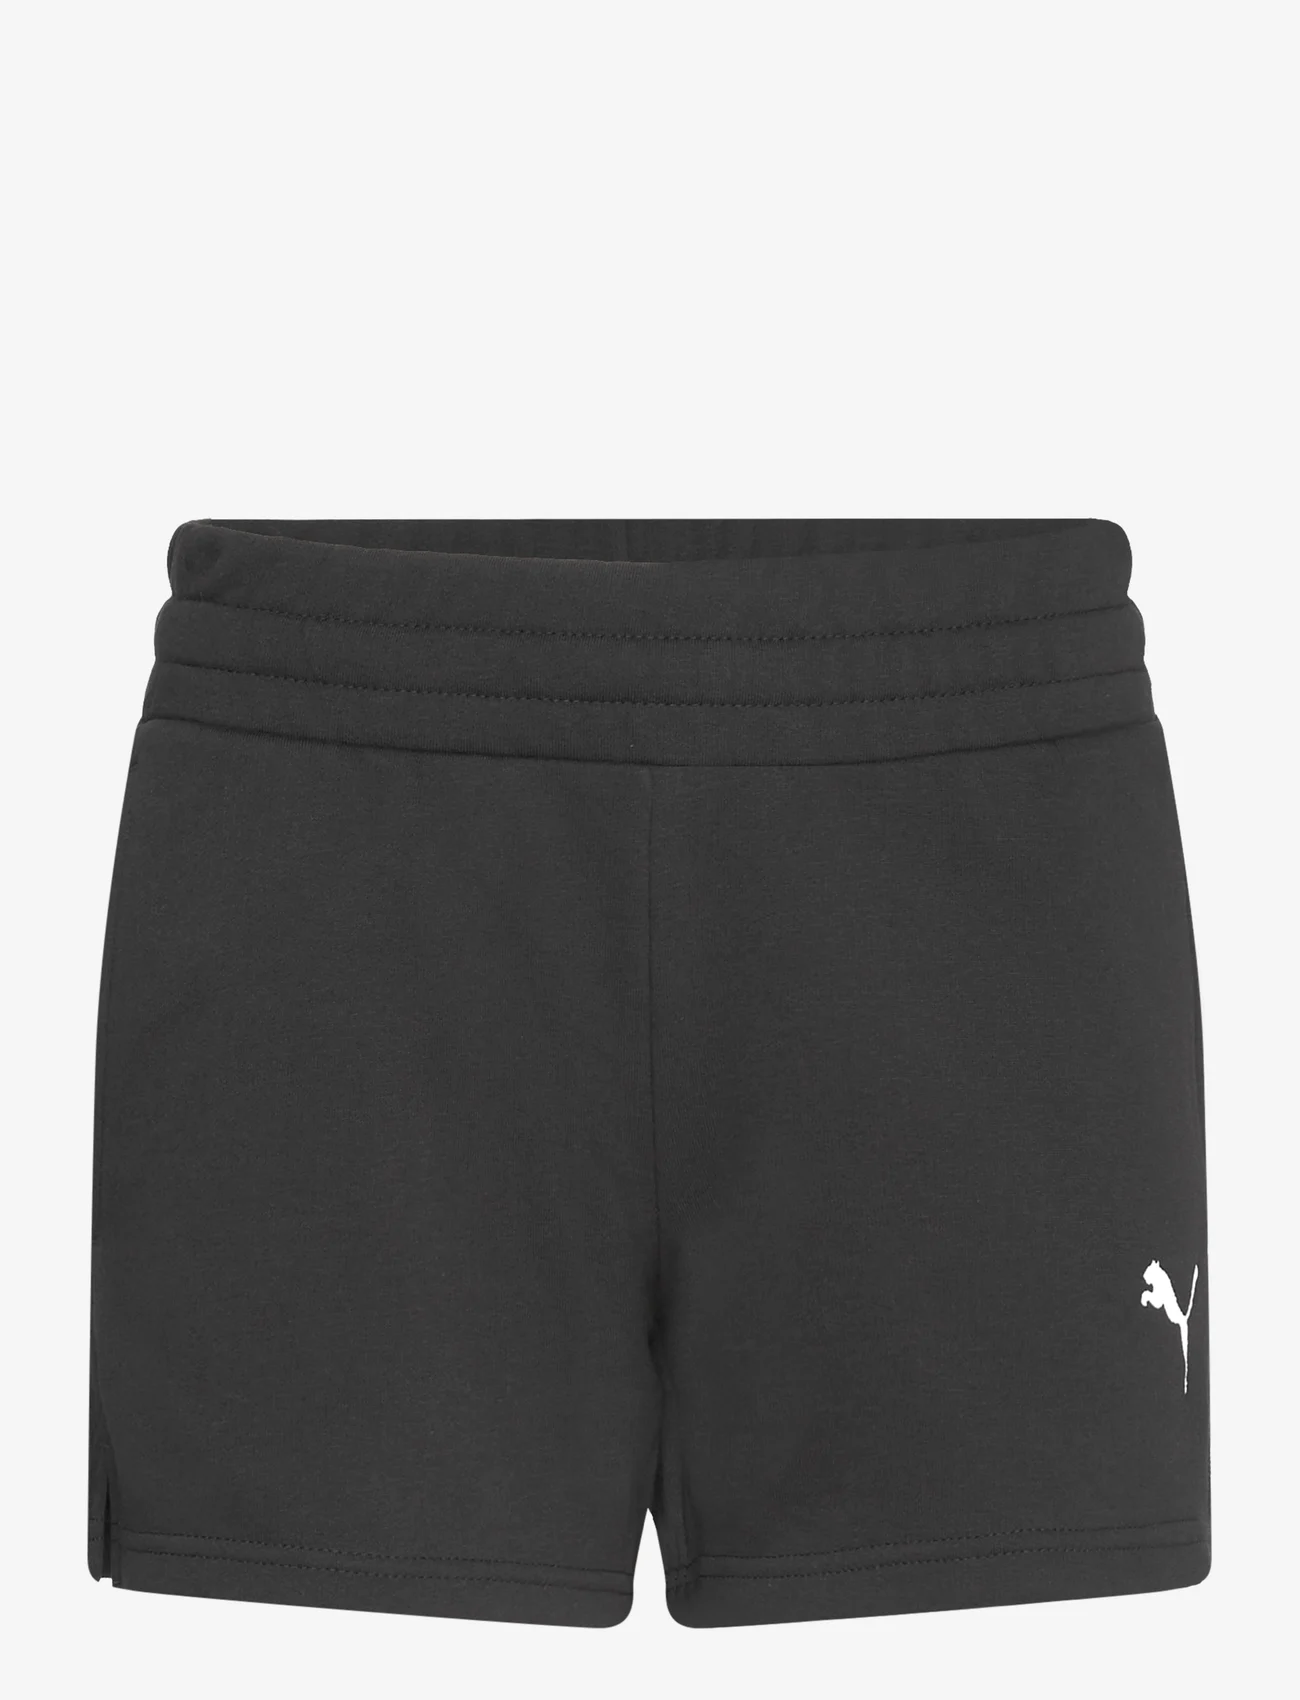 PUMA - teamGOAL 23 Casuals Shorts W - lowest prices - puma black - 0